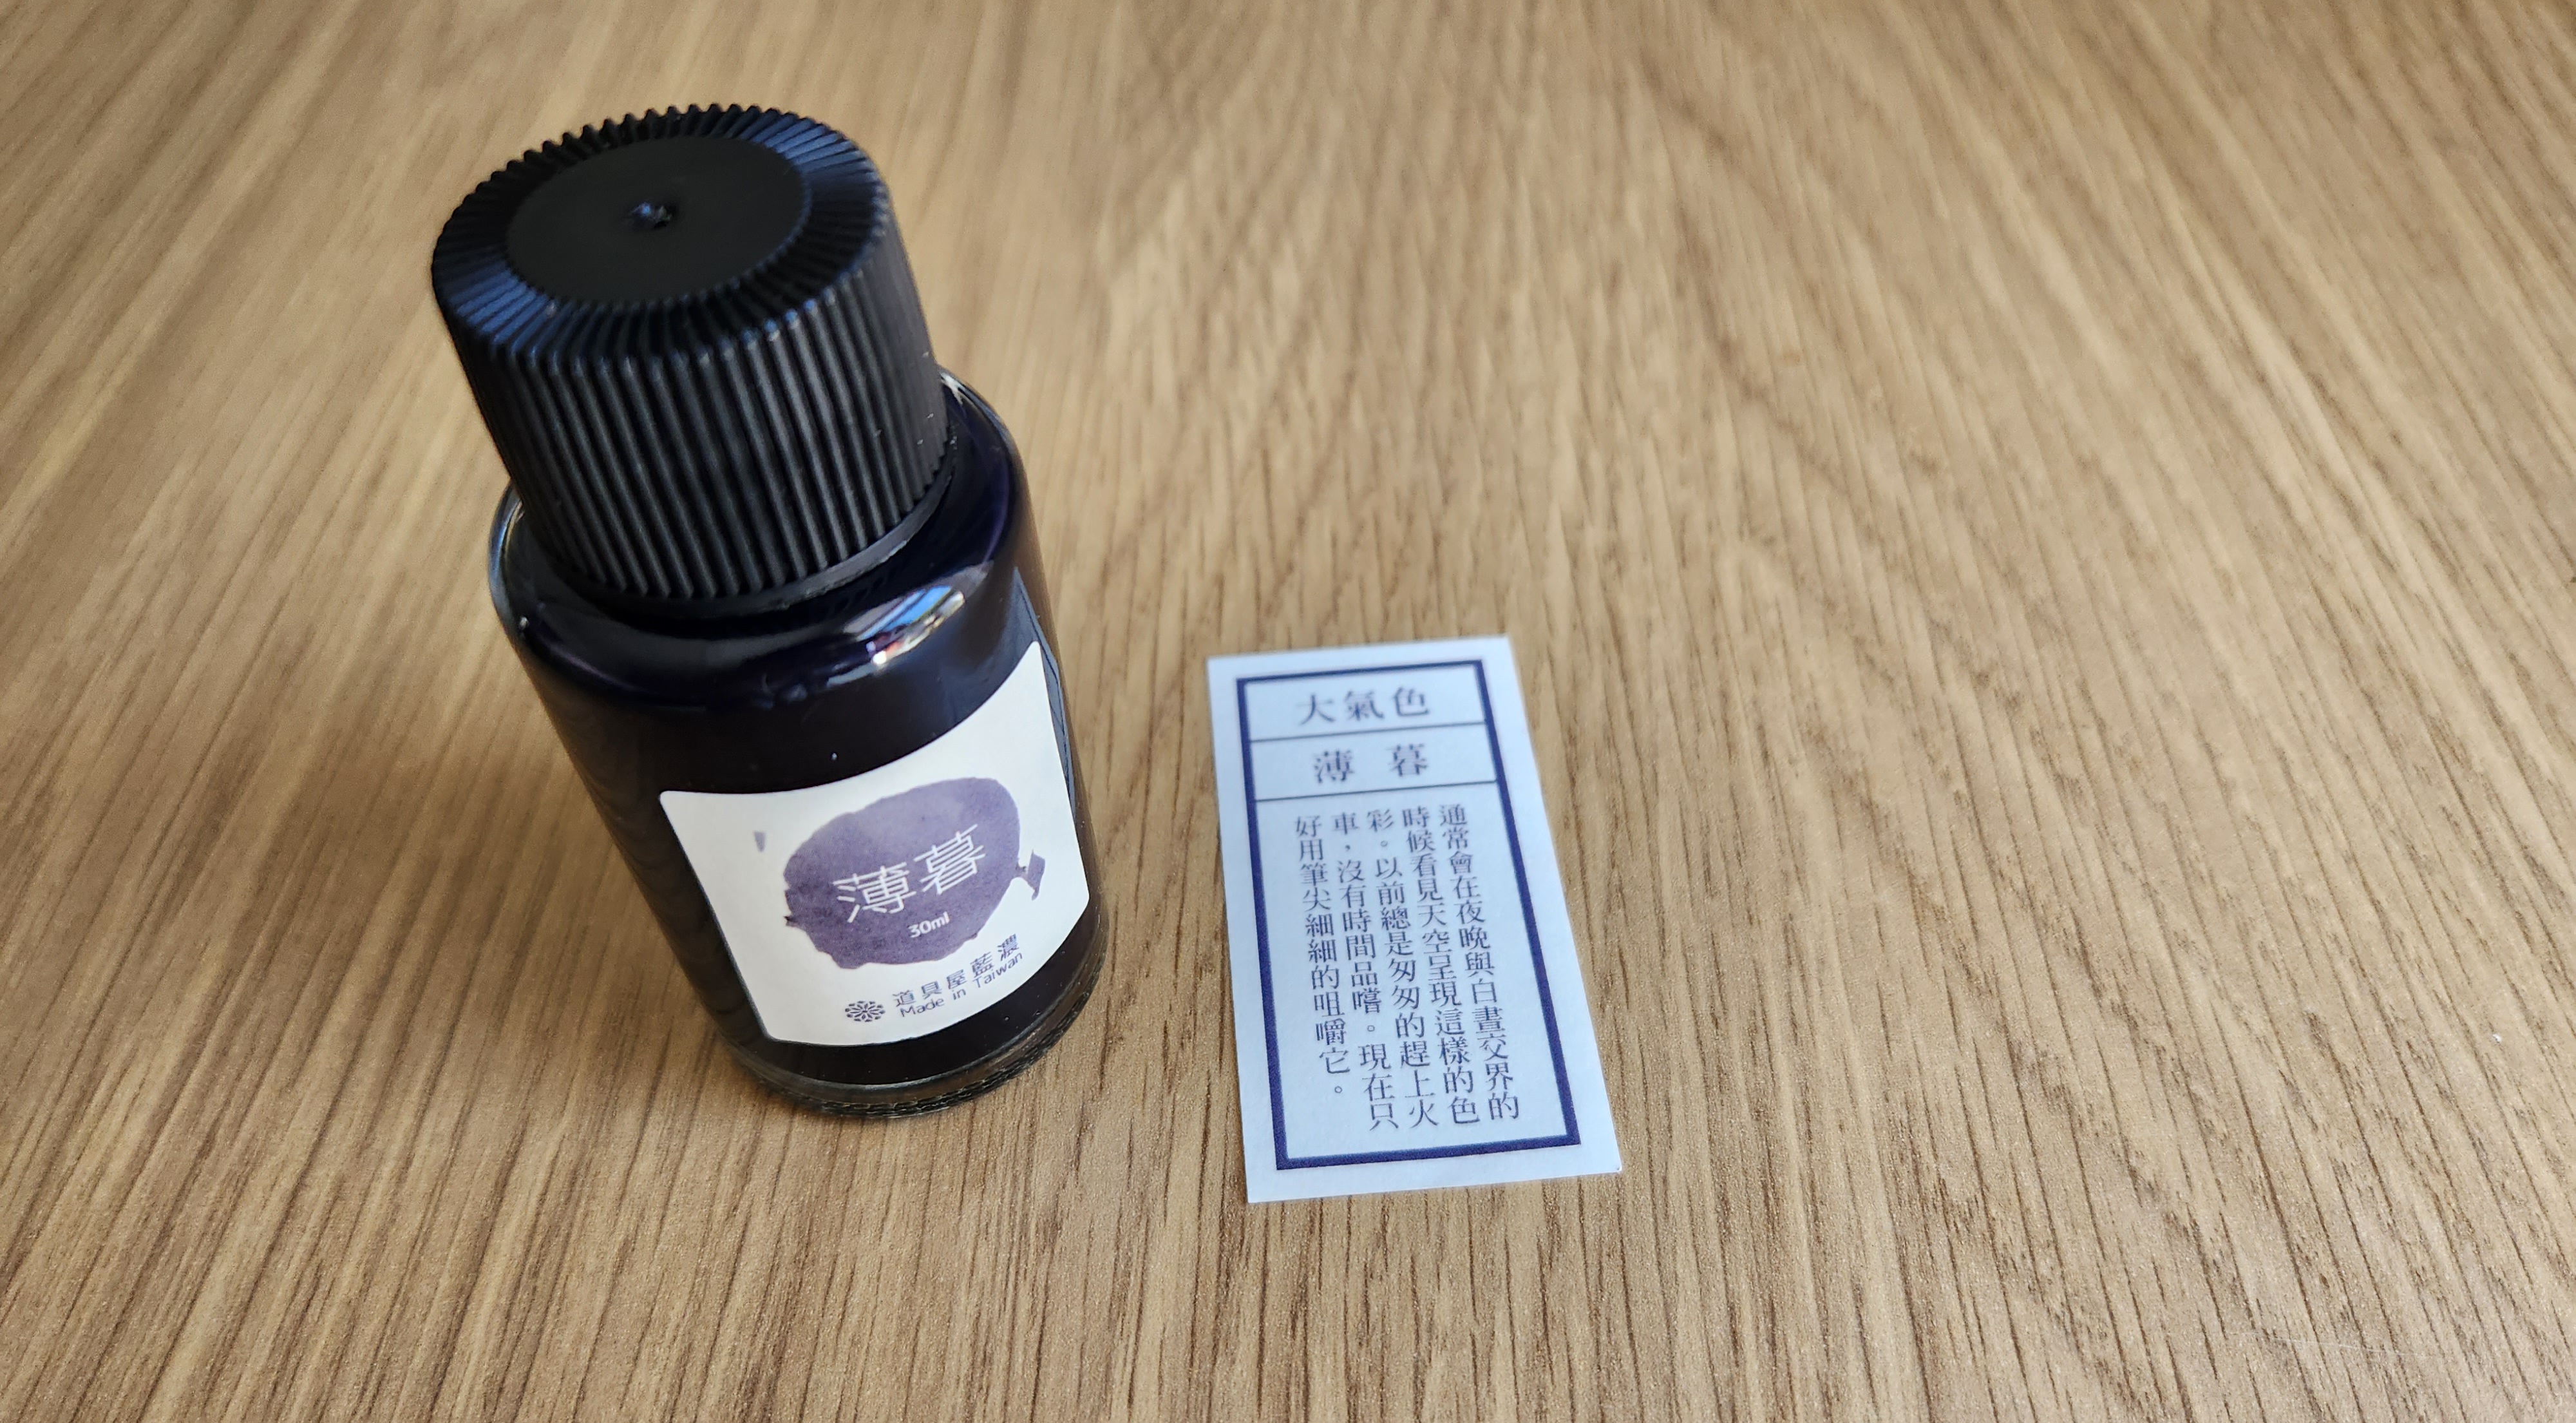 My box also contained that small slip of paper, which is a description of the ink colour.